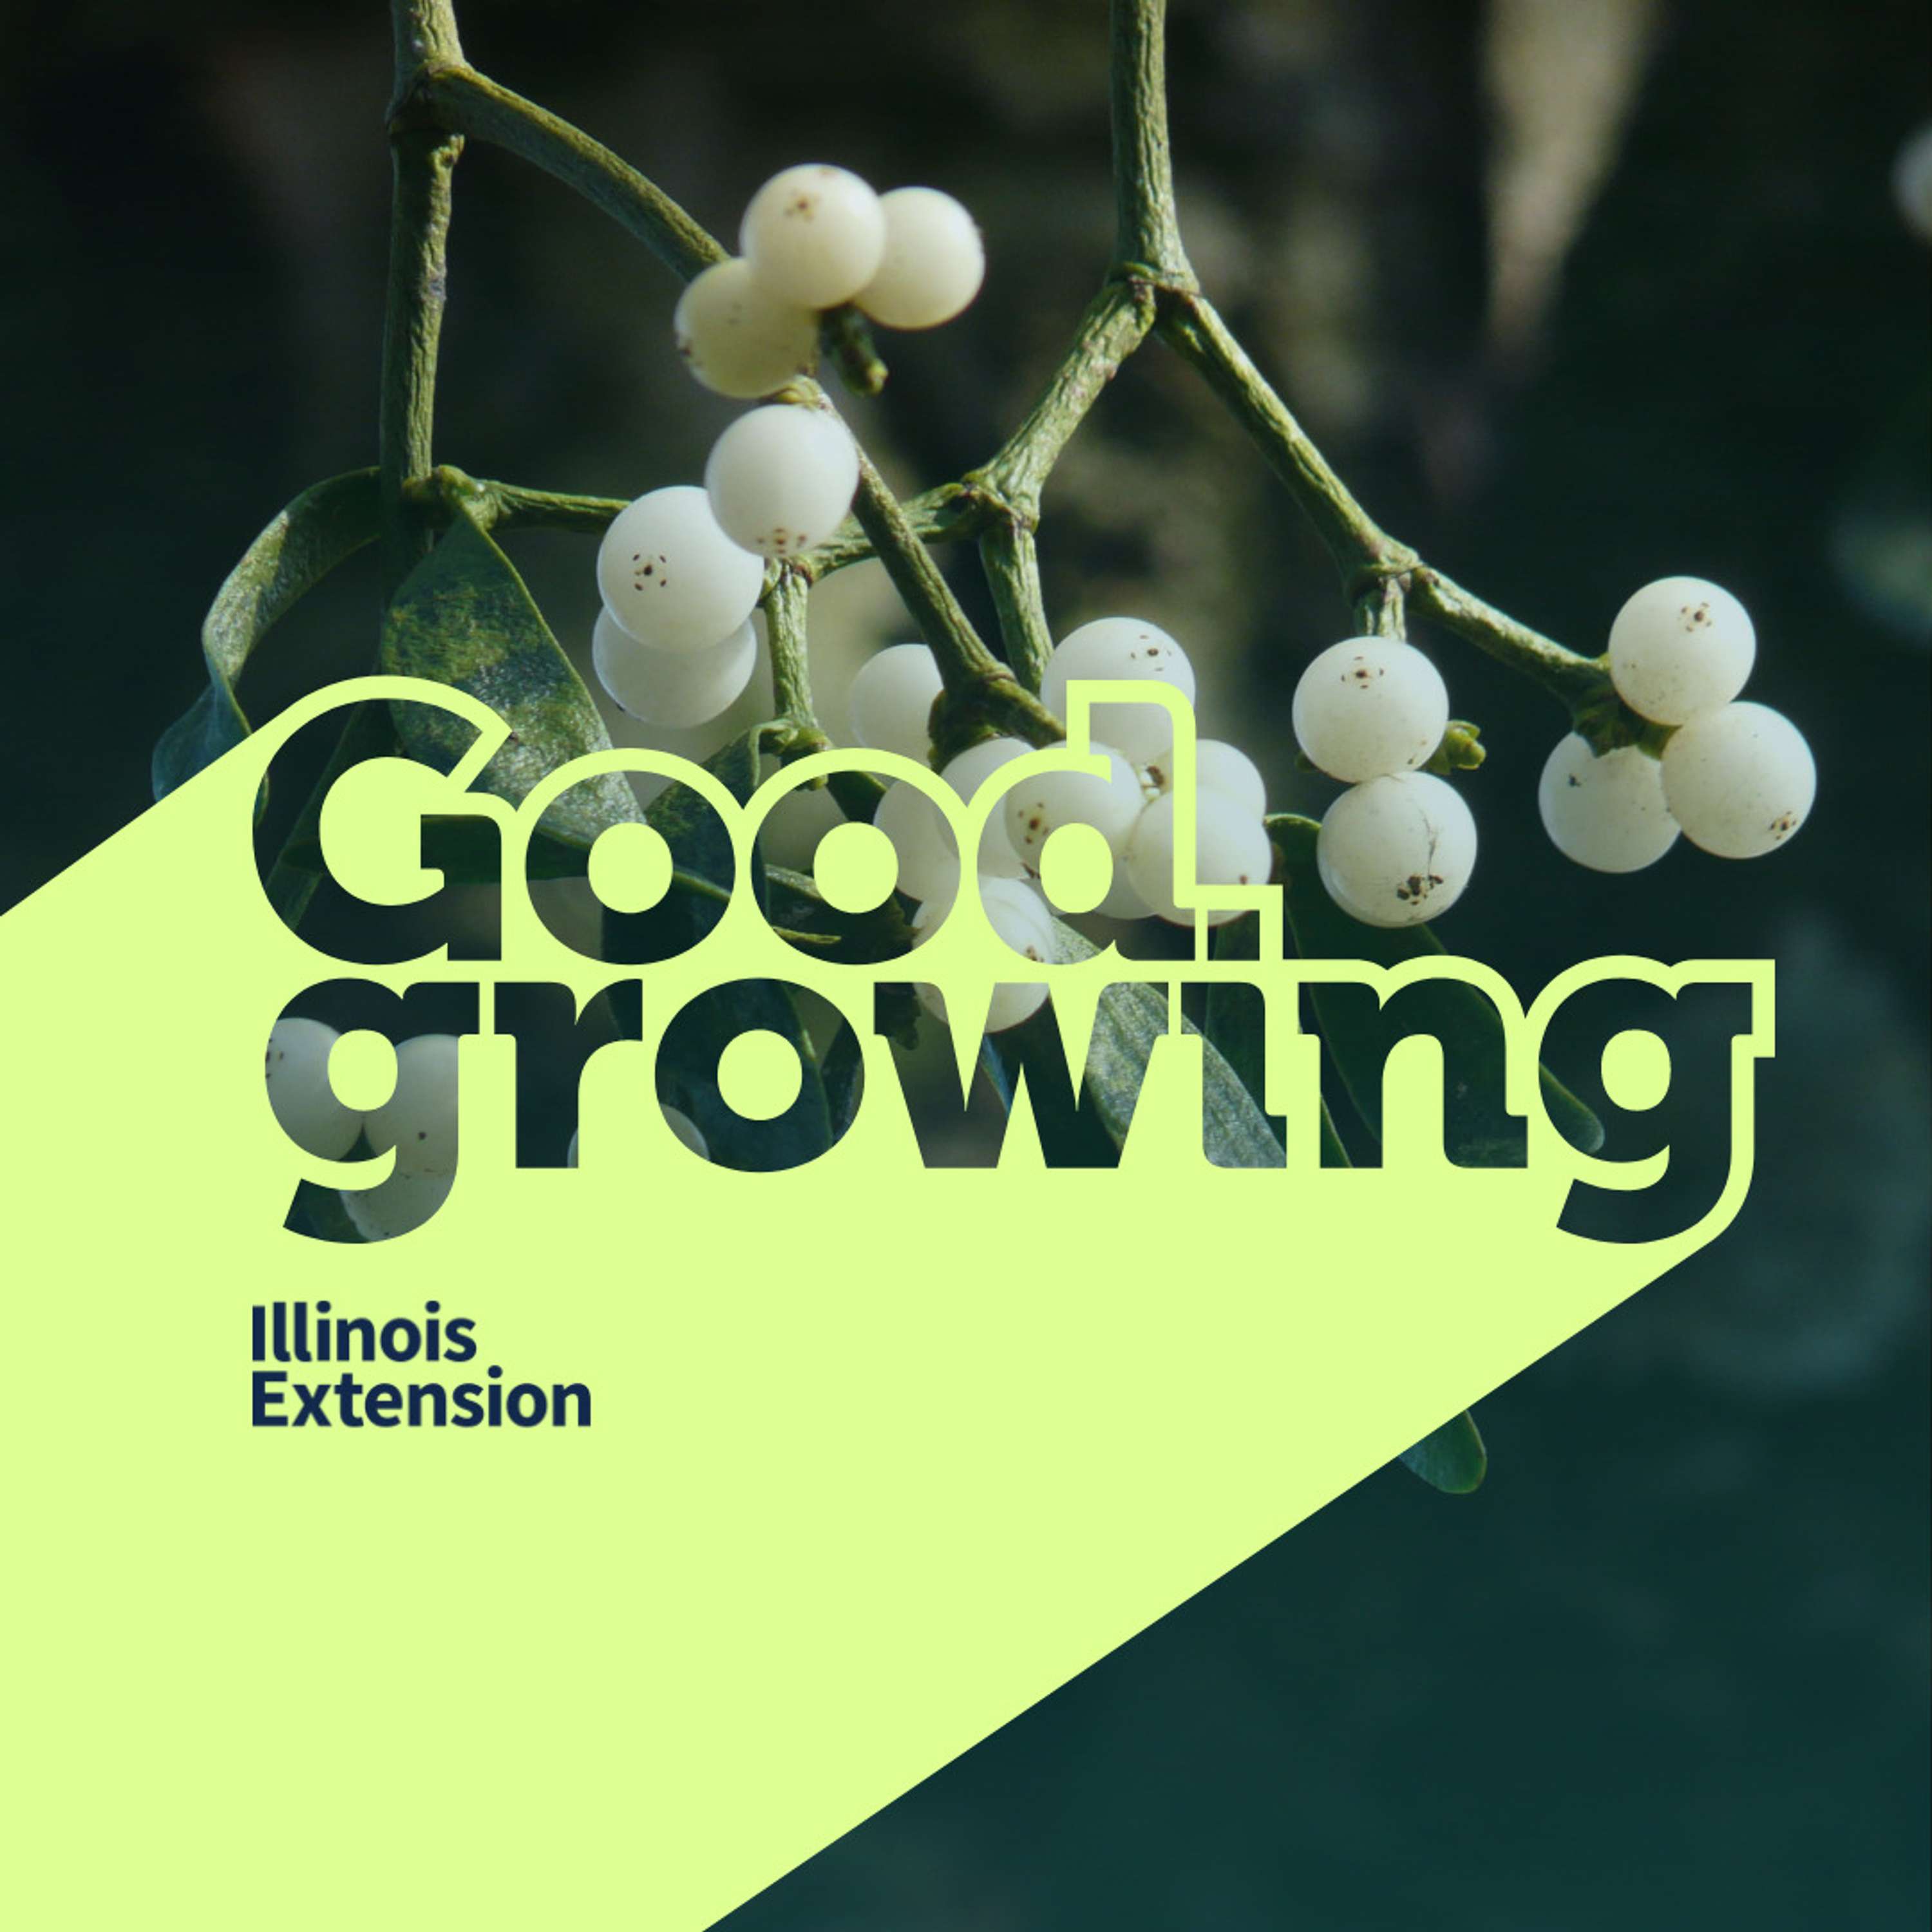 Ep. 159 Mistletoe Show: Learn about this holiday parasitic plant | #GoodGrowing